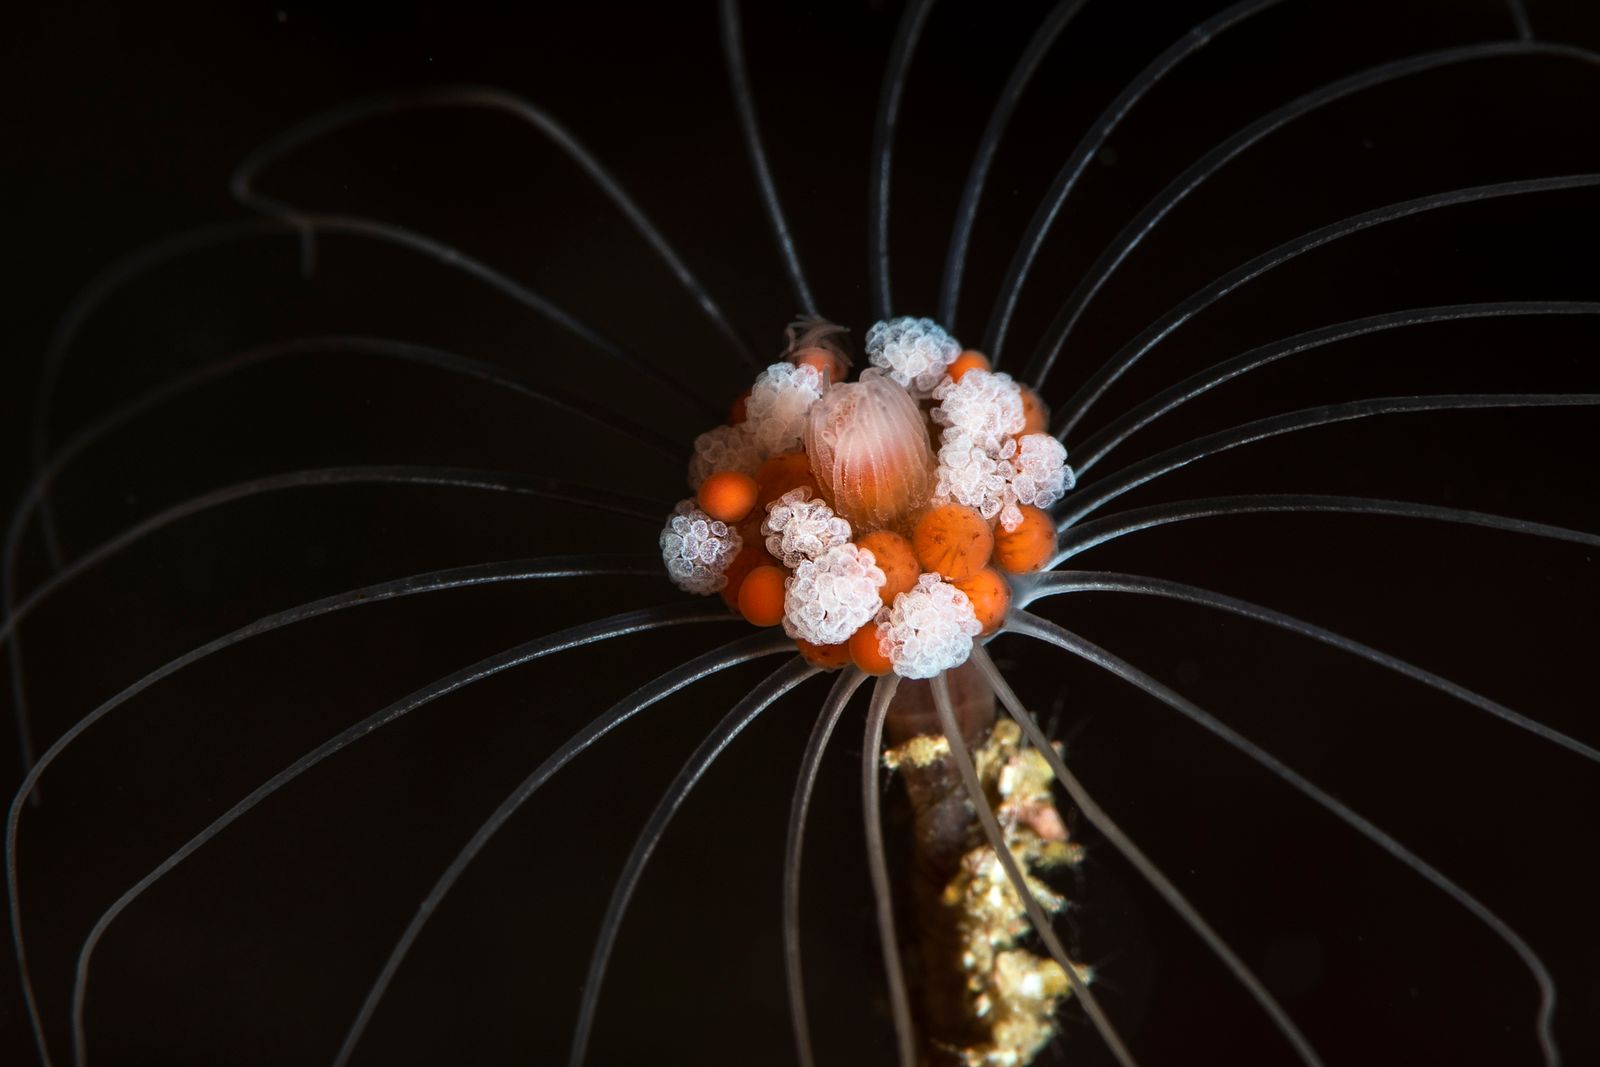 Solitary Hydroid in the Sea of Cortez